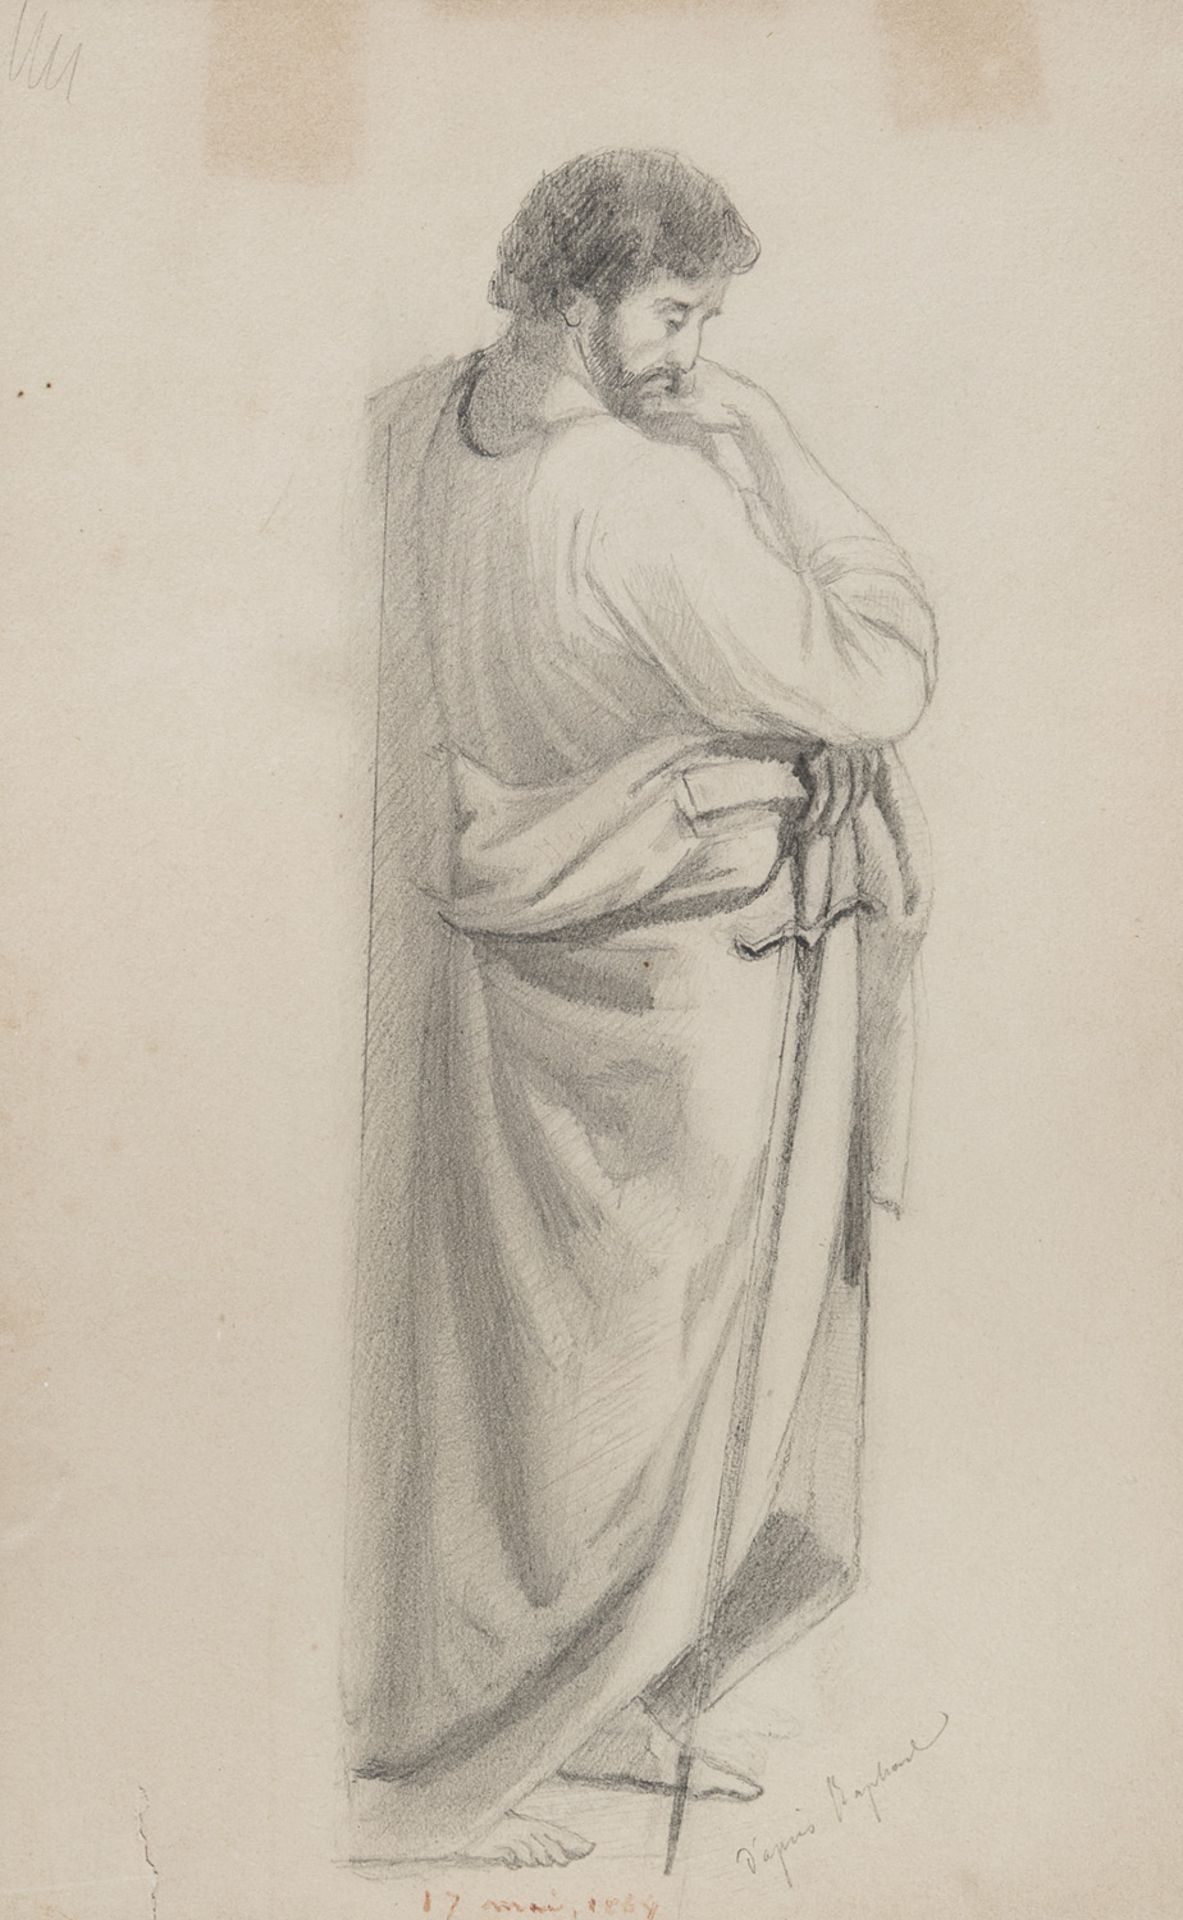 PENCIL DRAWING OF ST PAUL EARLY 20TH CENTURY